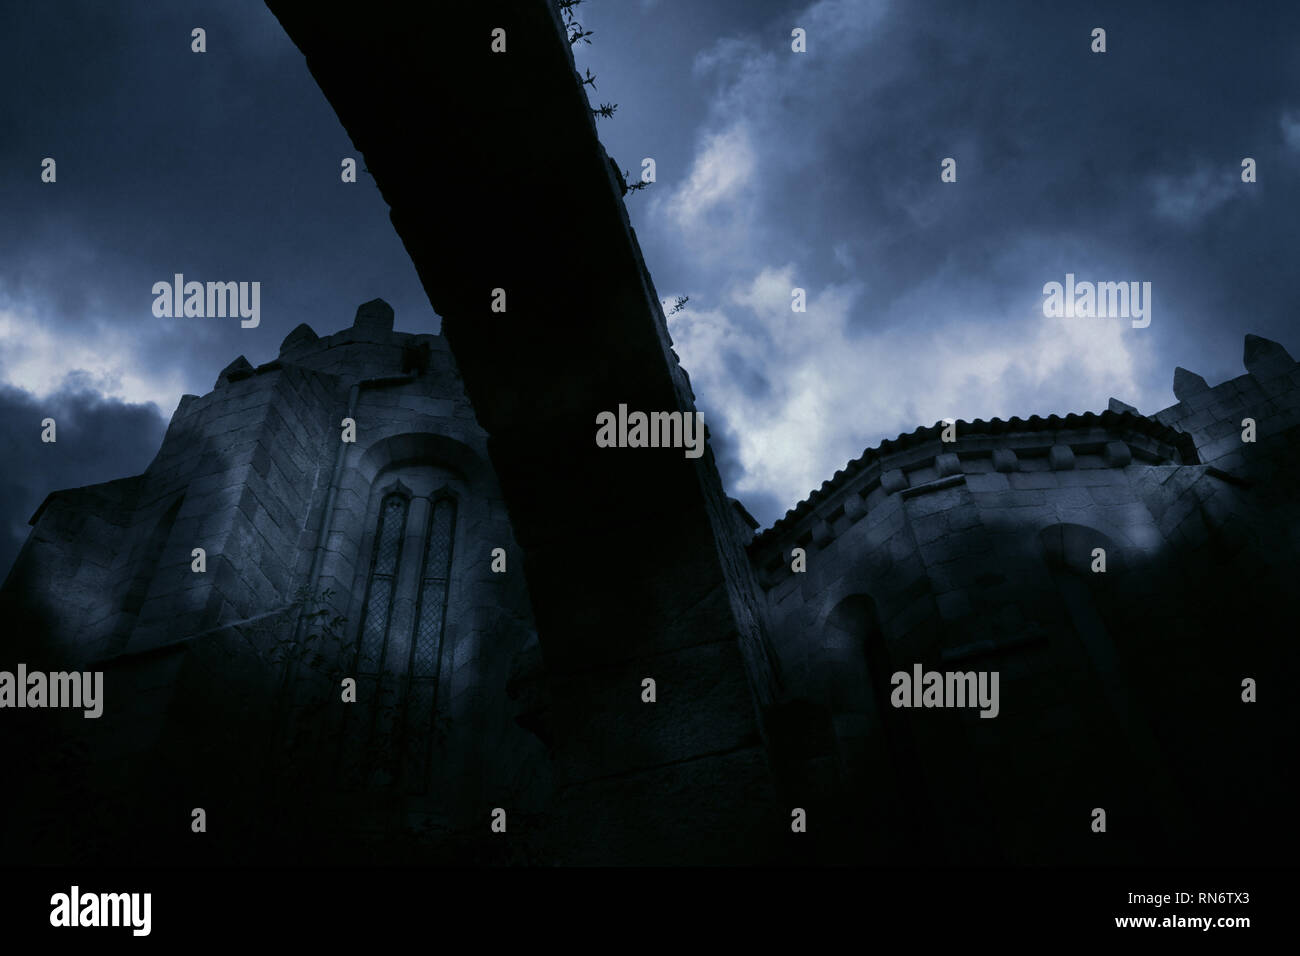 Medieval european abbey in a cloudy night Stock Photo